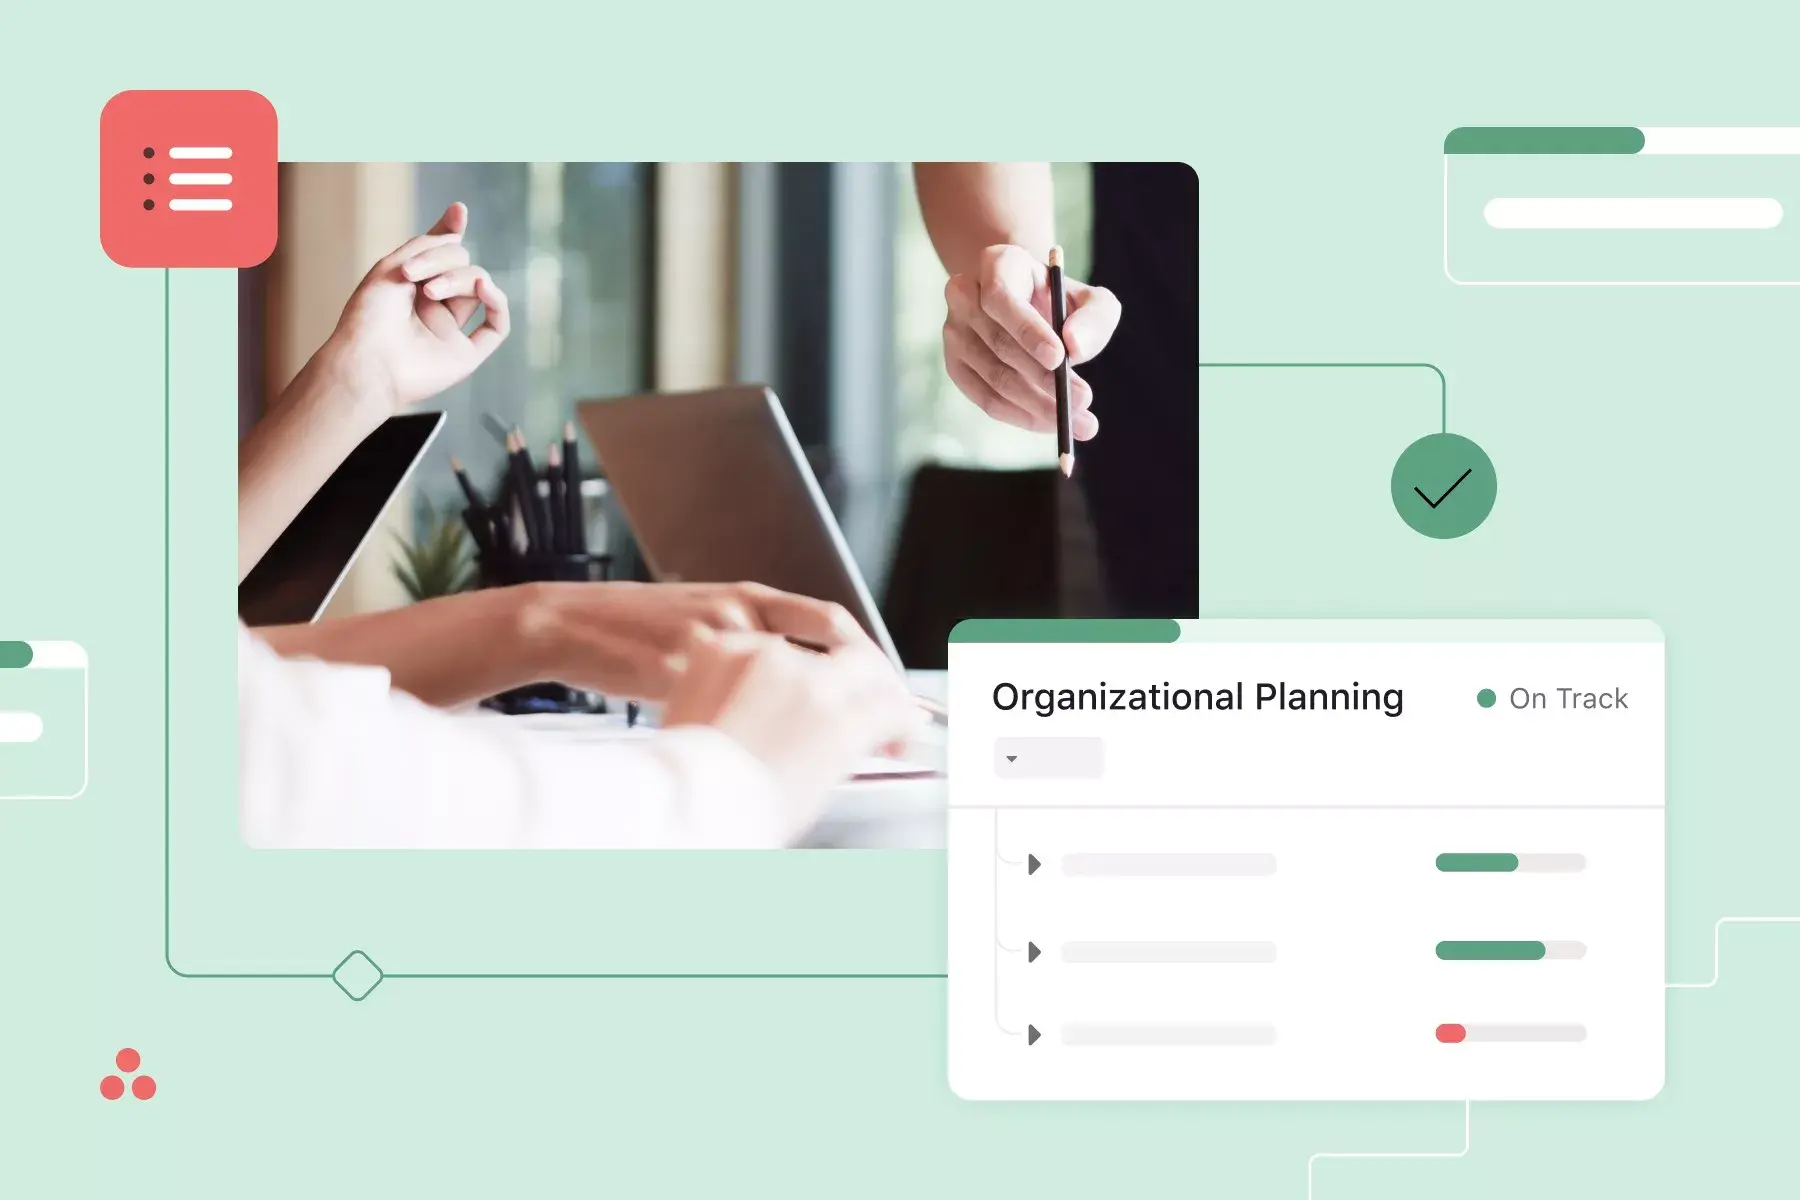 Image for an article on organizational planning. Shows a photograph of people in a business environment and abstracted product UI demonstrating how you can build an organizational plan in Asana.